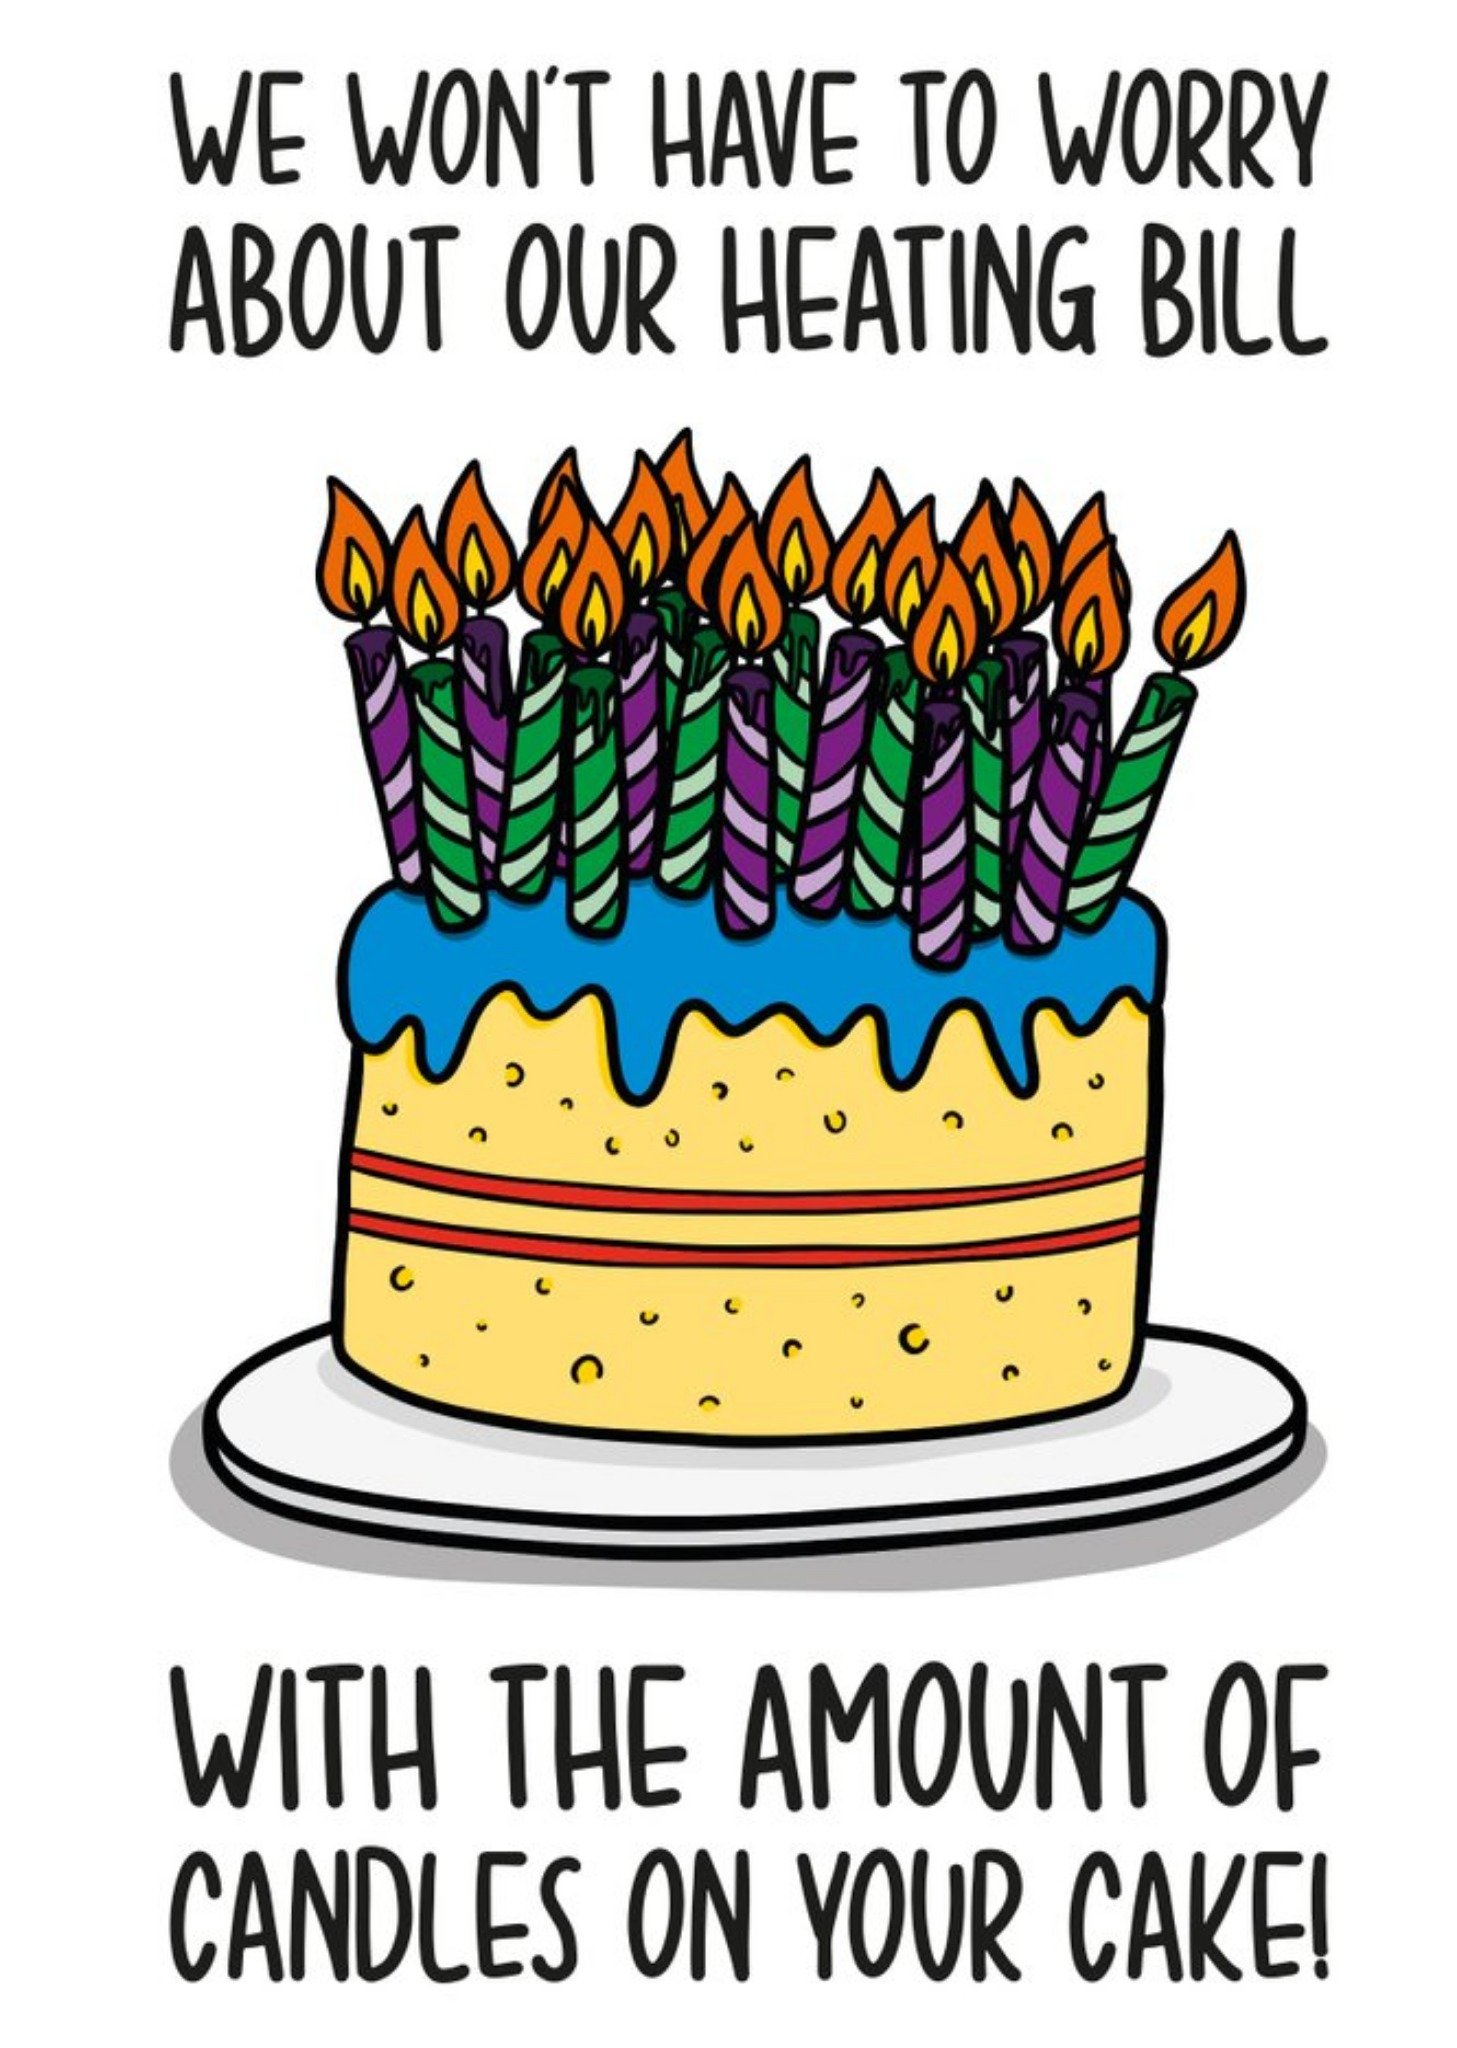 Moonpig Heating Bill Candles On Cake Illustrated Birthday Card, Large